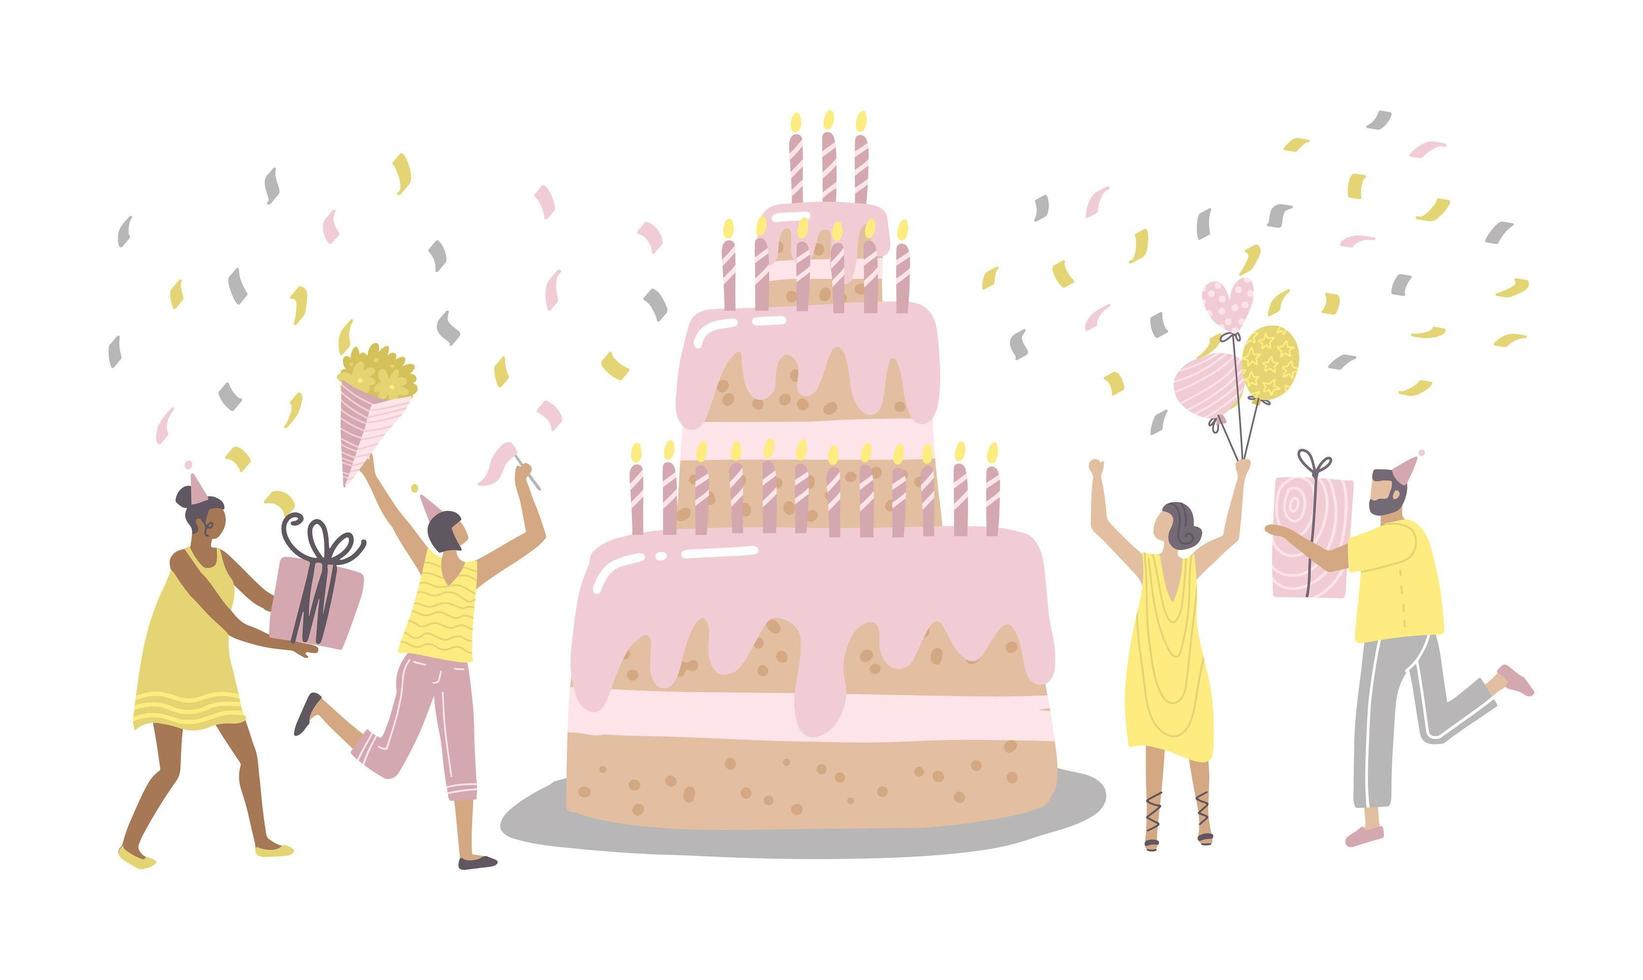 People Characters dancing near Birthday Cake and Celebrating. Woman and Man holding Gifts and Balloons. Friends Enjoying the Bday Party. Happy Birthday Concept. Flat hand darwn Vector Illustration.